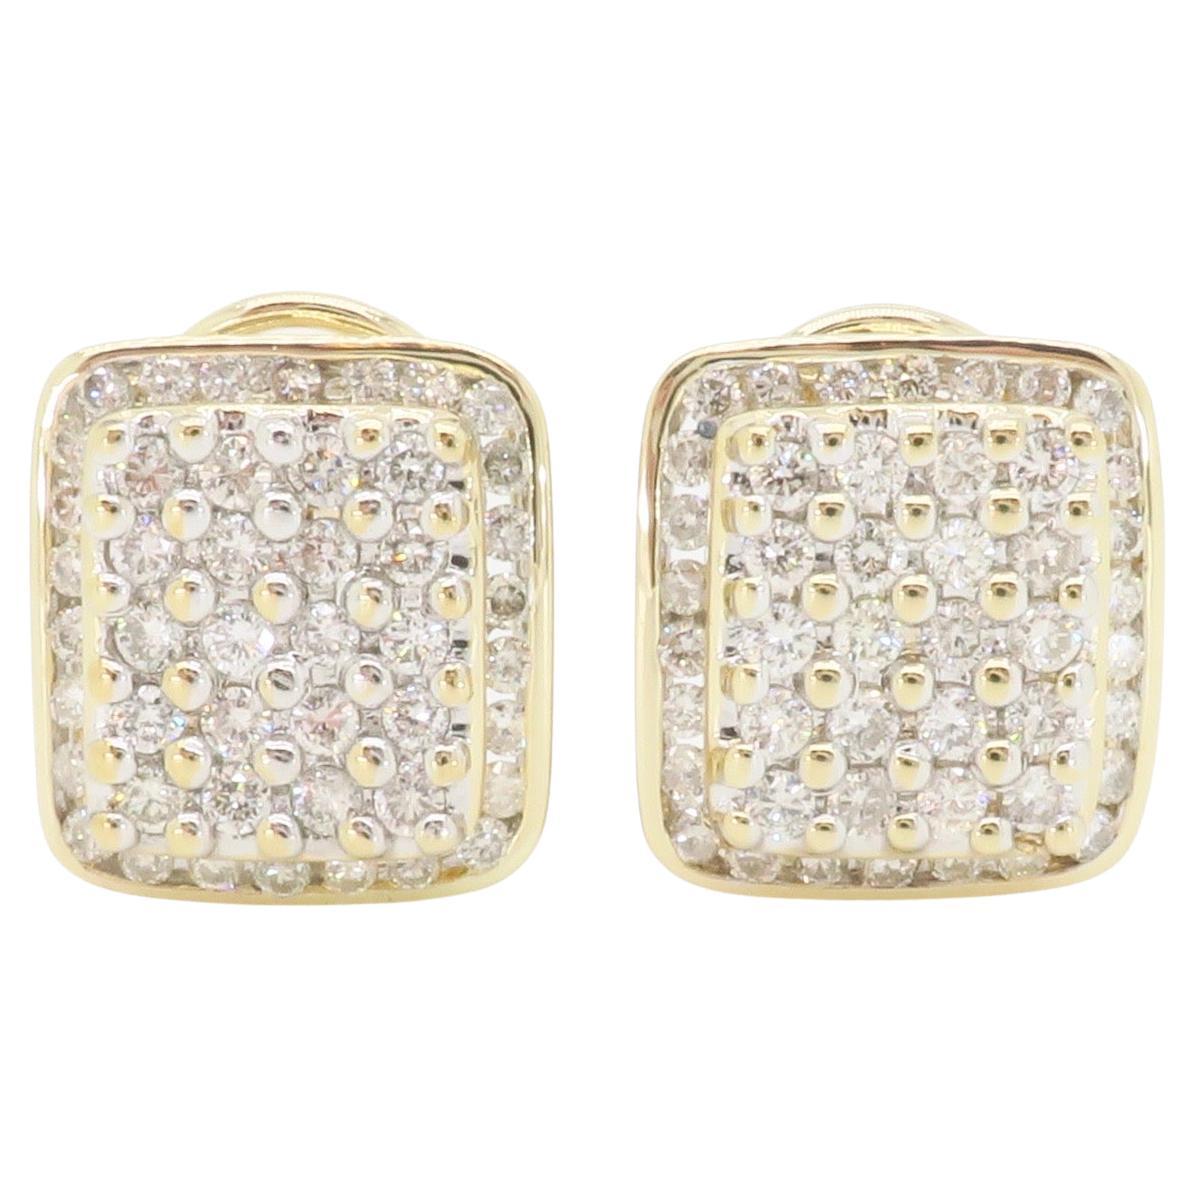 Block-Style Diamond Cluster Earrings Made in 14k Yellow Gold